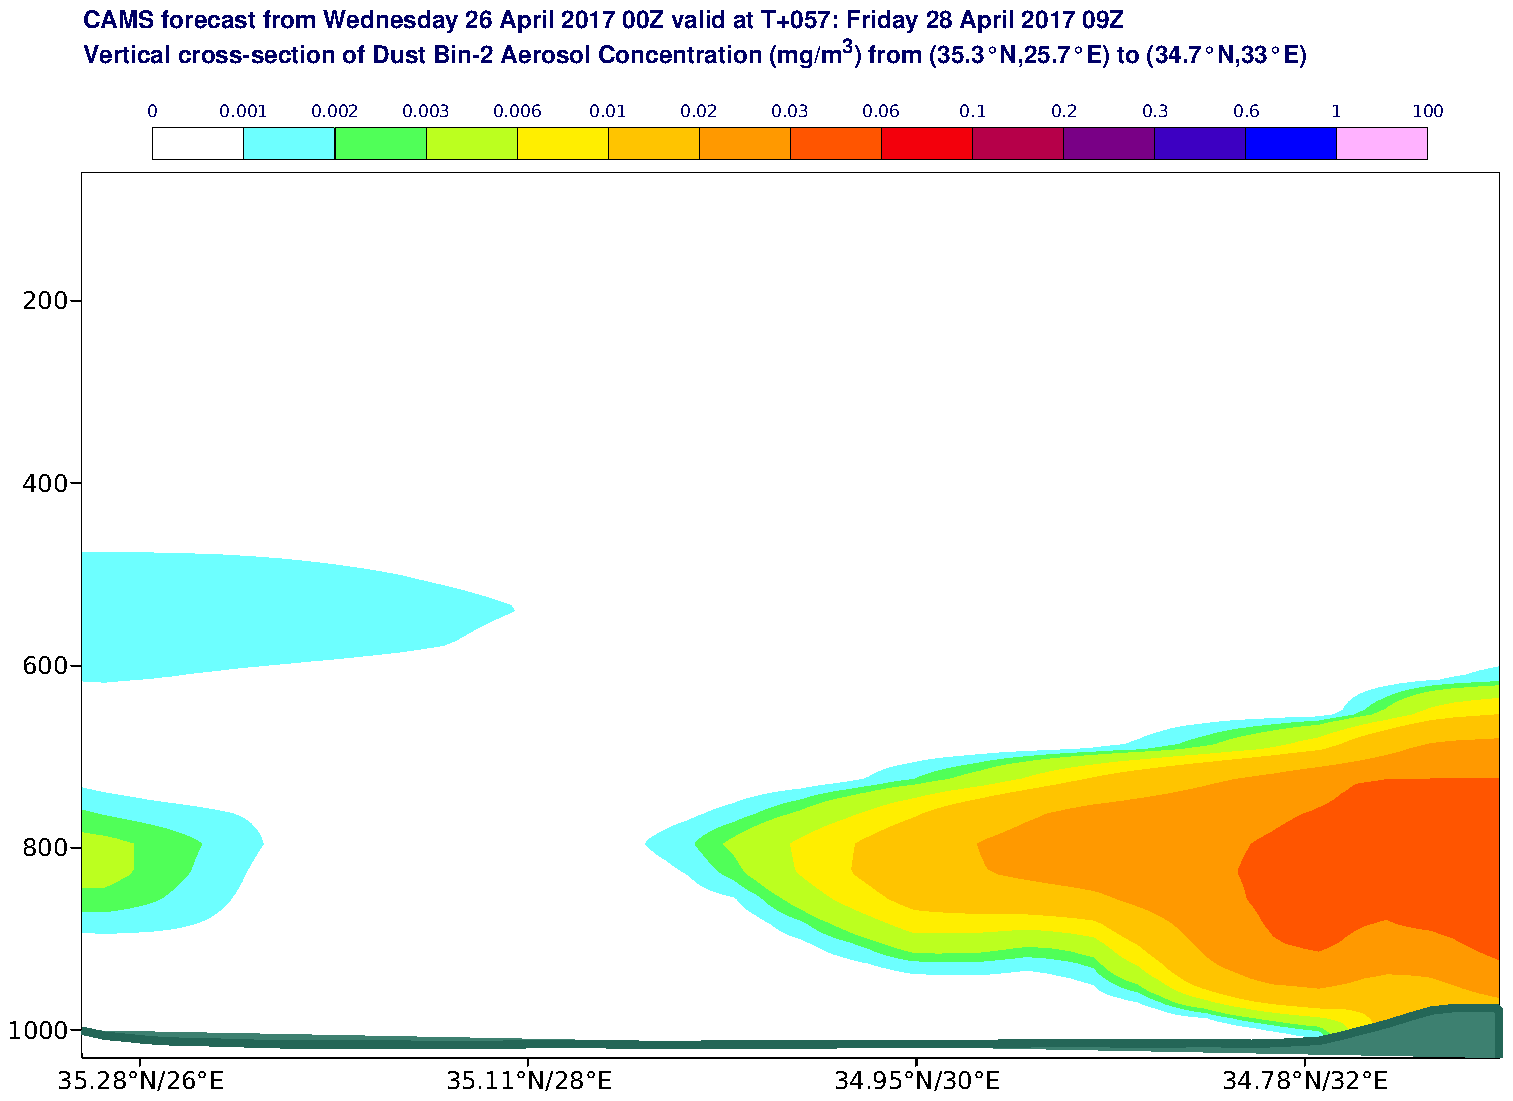 Vertical cross-section of Dust Bin-2 Aerosol Concentration (mg/m3) valid at T57 - 2017-04-28 09:00